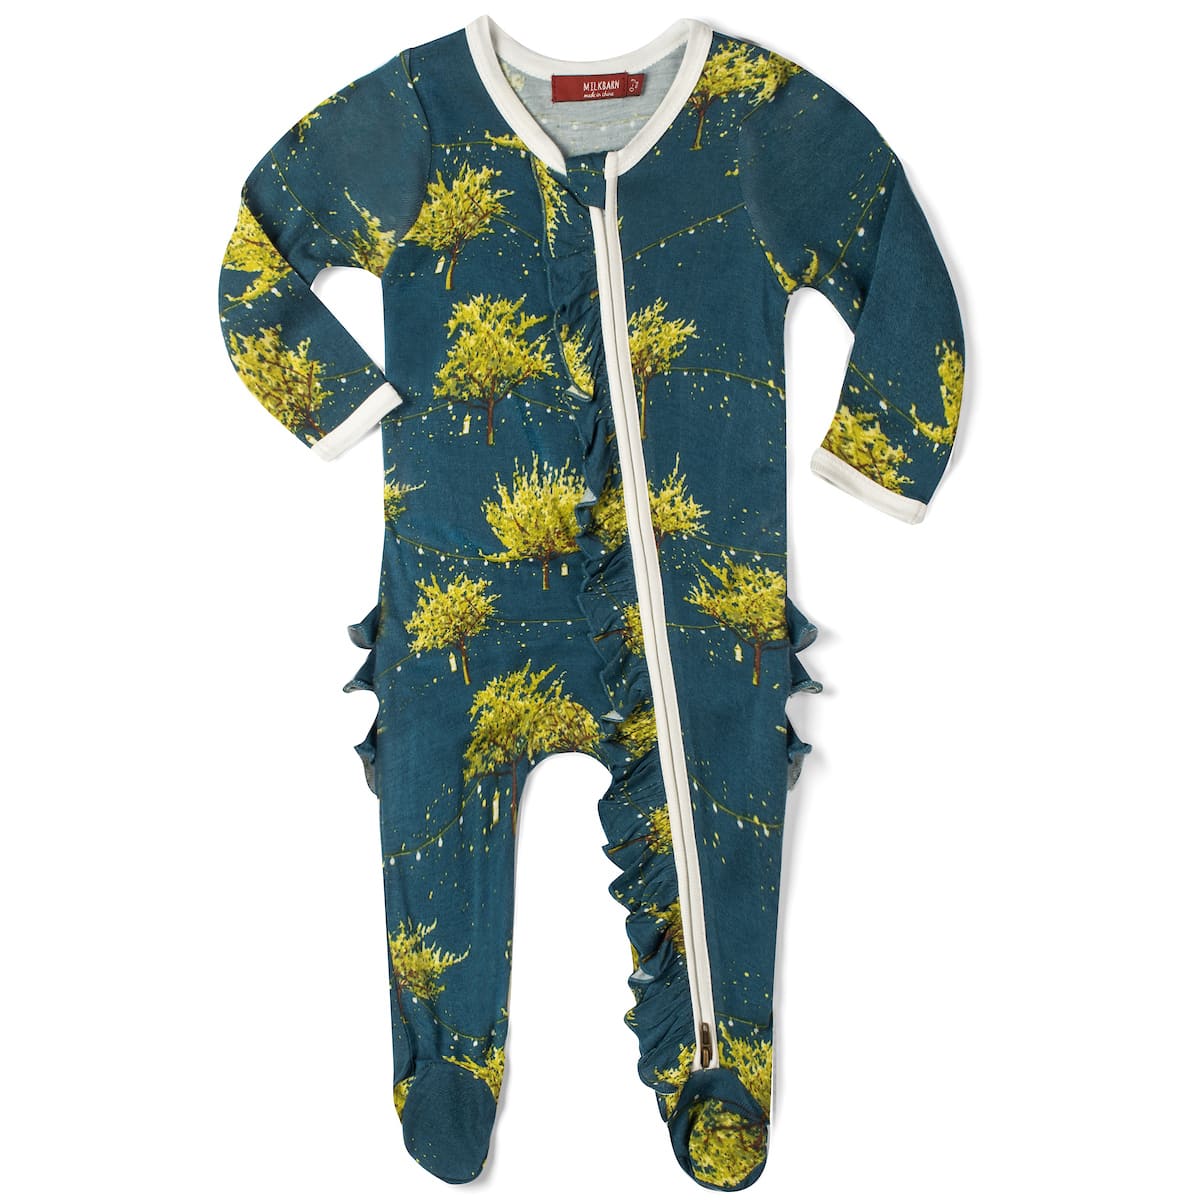 blue footed romper with all-over pattern of trees and fireflies.